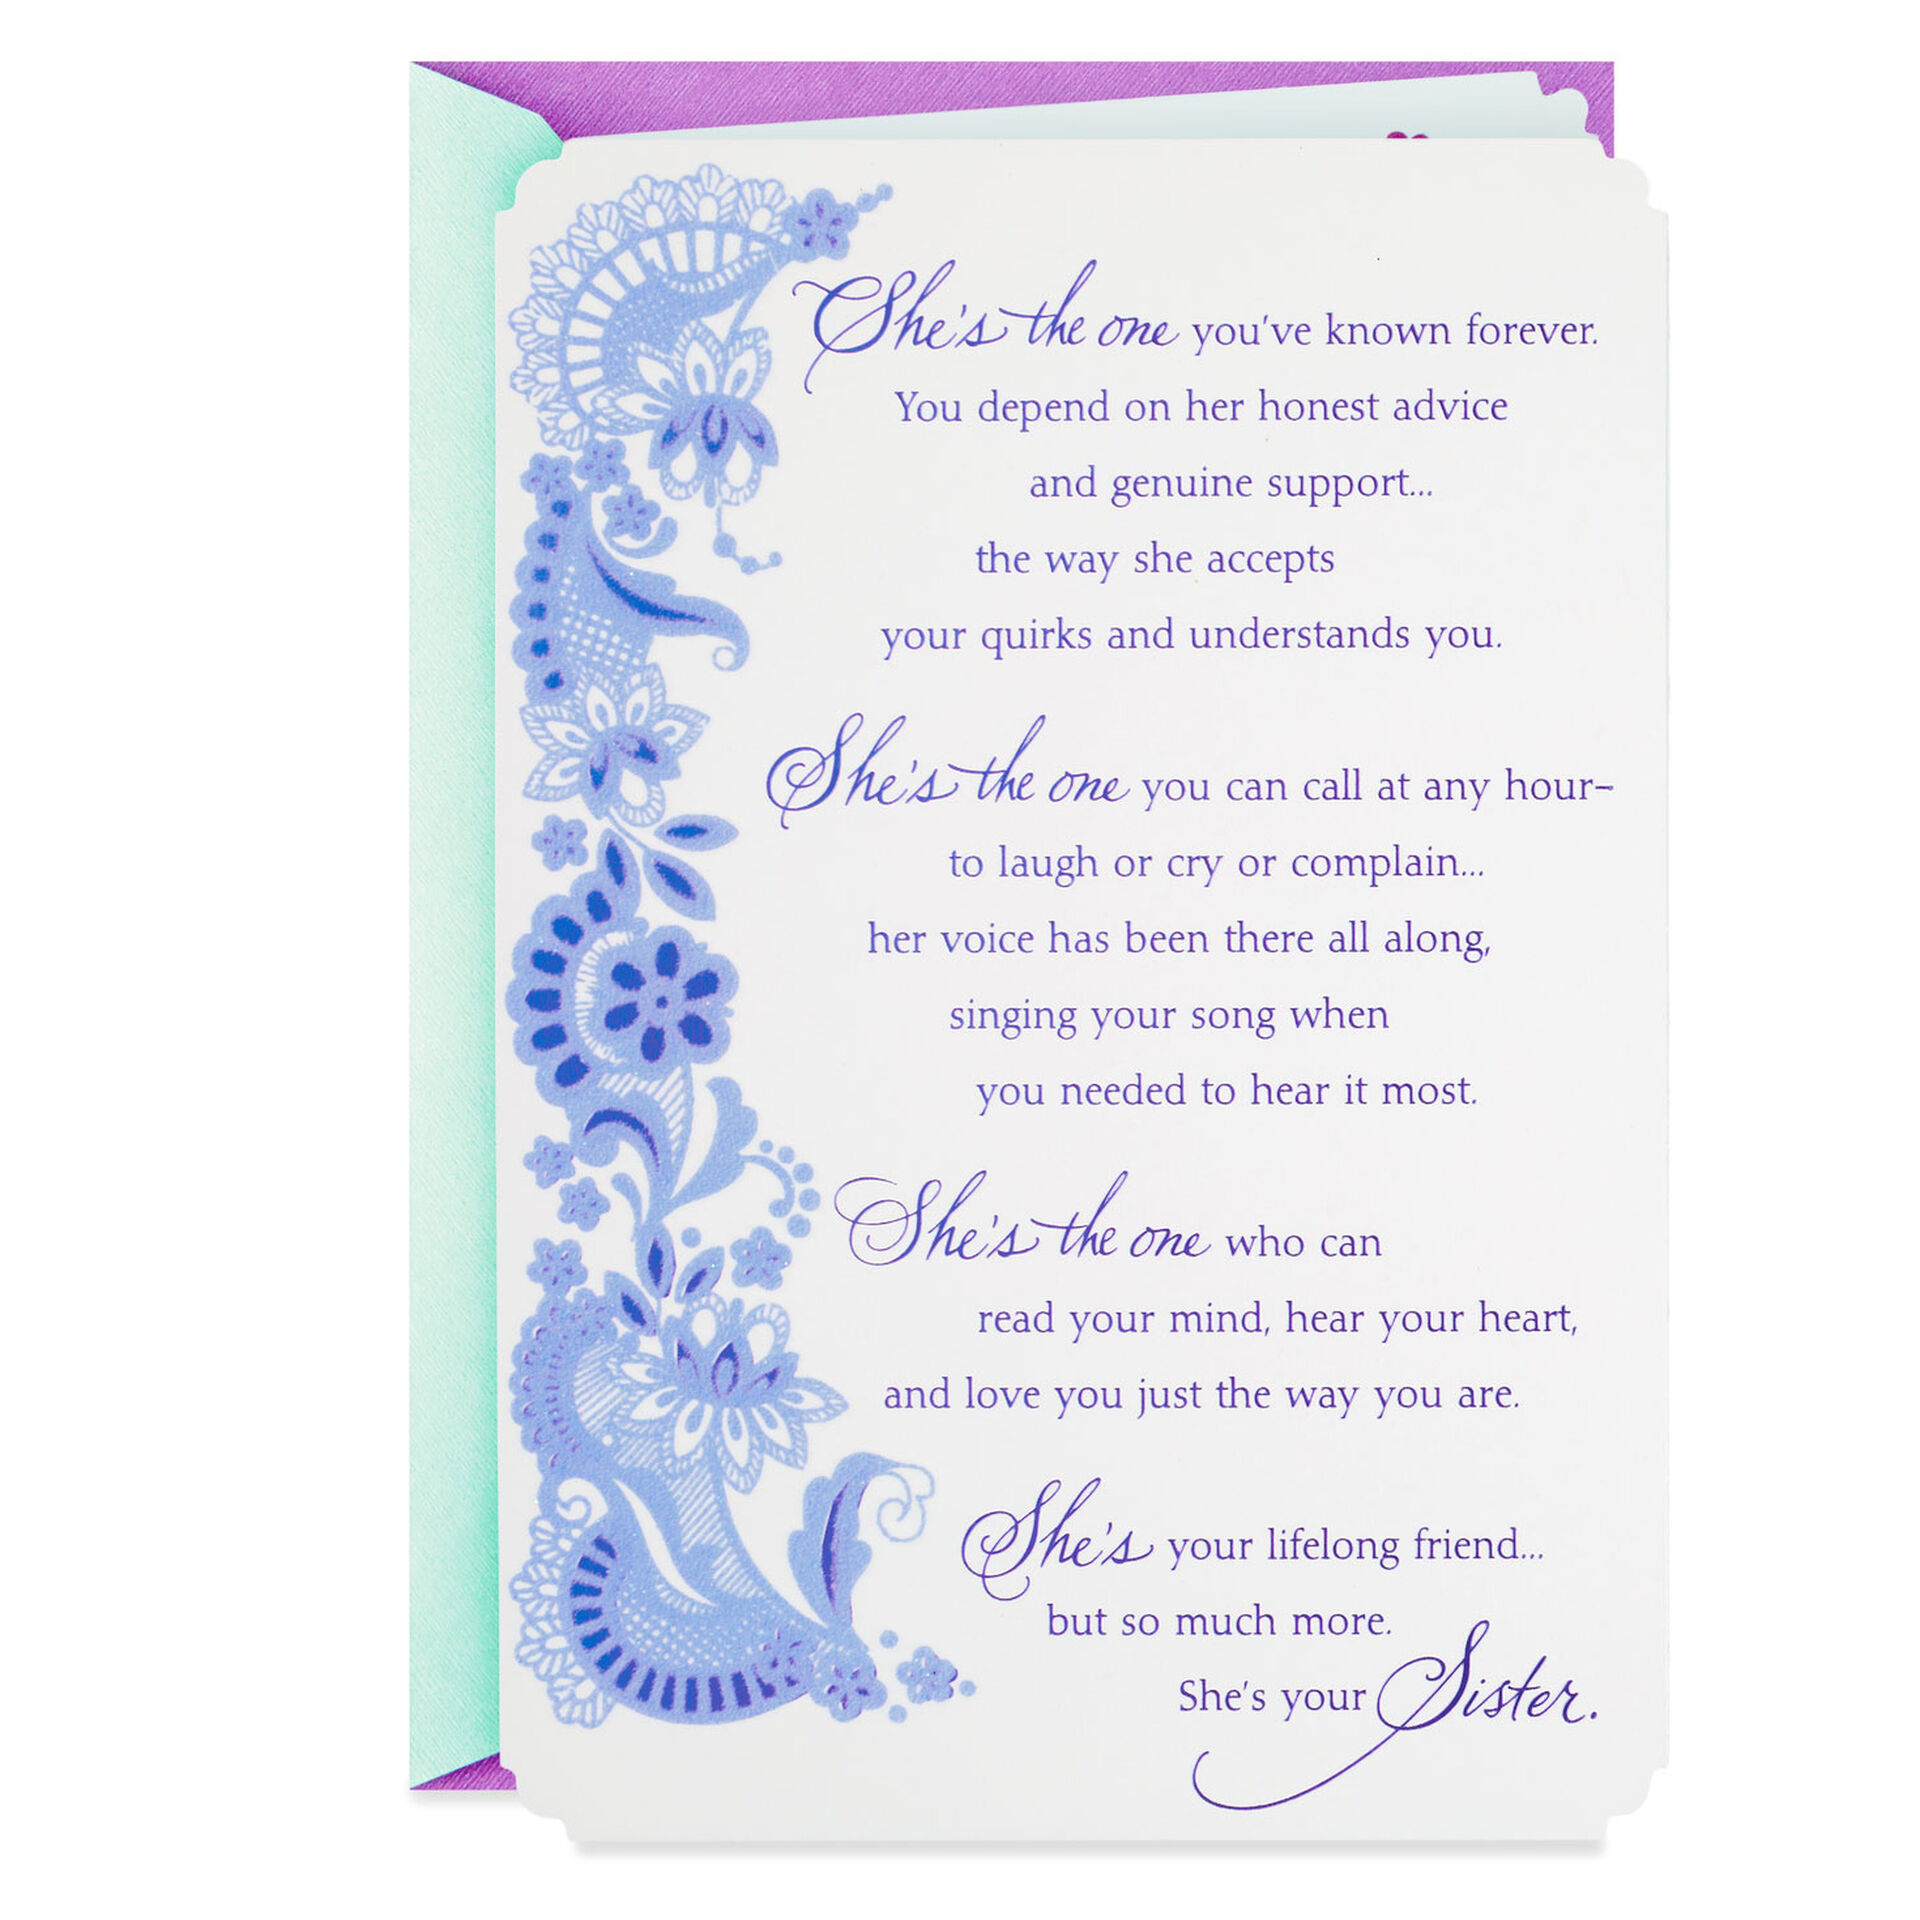 Lace-Doilies-and-Flowers-Birthday-Card-for-Sister_499FBD9338_01